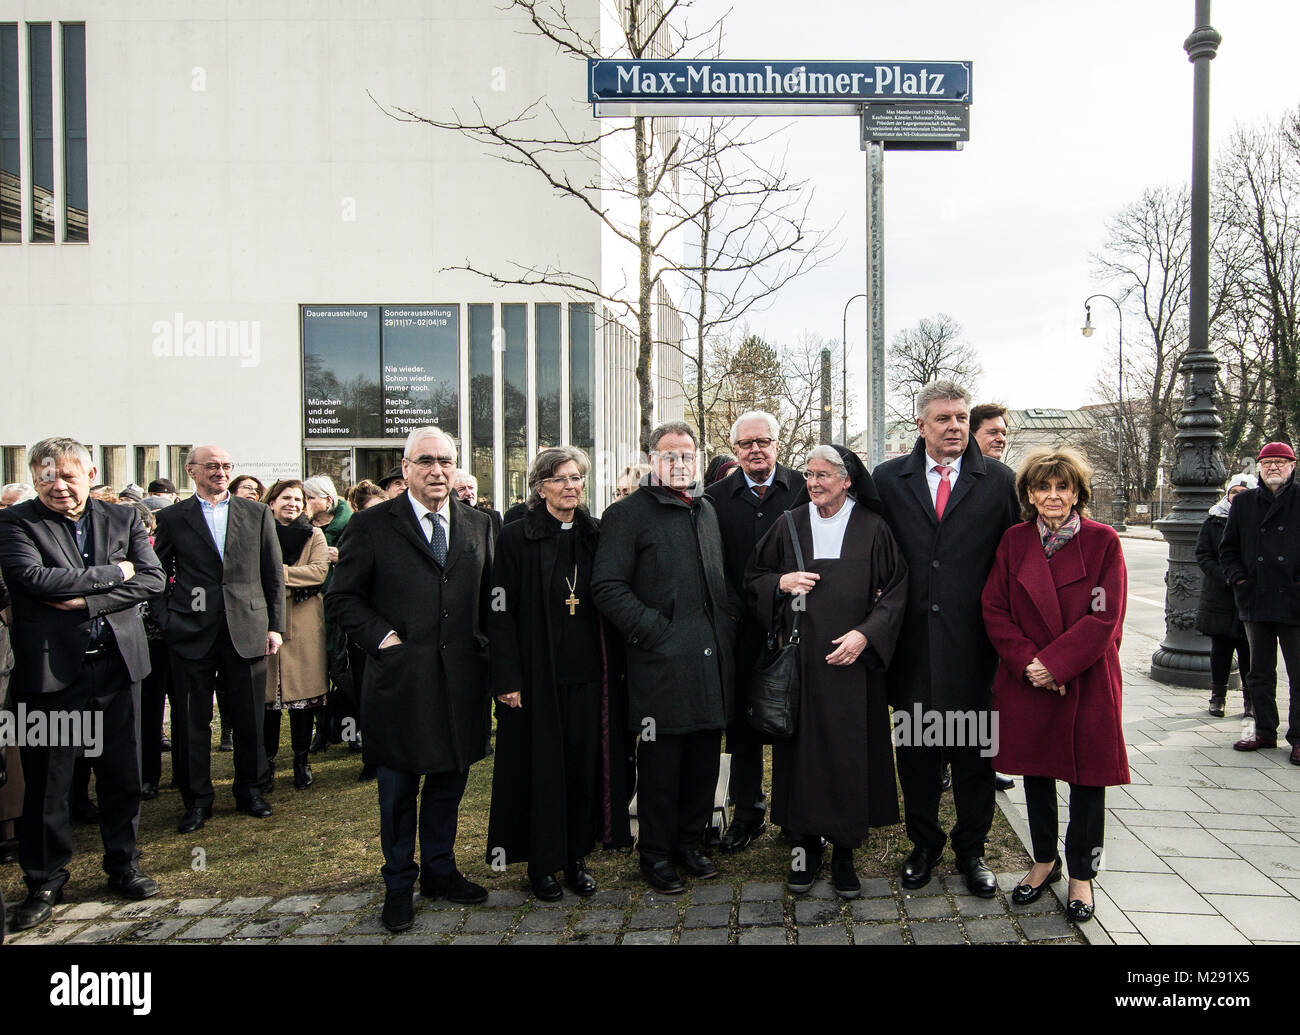 Munich, Bavaria, Germany. 6th Feb, 2018. R-L Charlotte Knoblauch, Dieter Reiter, Sister Elija Bossler, Ernst Mannheimer. The City of Munich, Germany dedicated the plaza adjacent to the National Socialism Documentation Center (NS-Dokumentationszentrum) building to Holocaust survivor Max Mannheimer. Mannheimer was an author, painter, and prolific speaker about the experience. He and his brother were the only family members to survive. a Credit: ZUMA Press, Inc./Alamy Live News Stock Photo